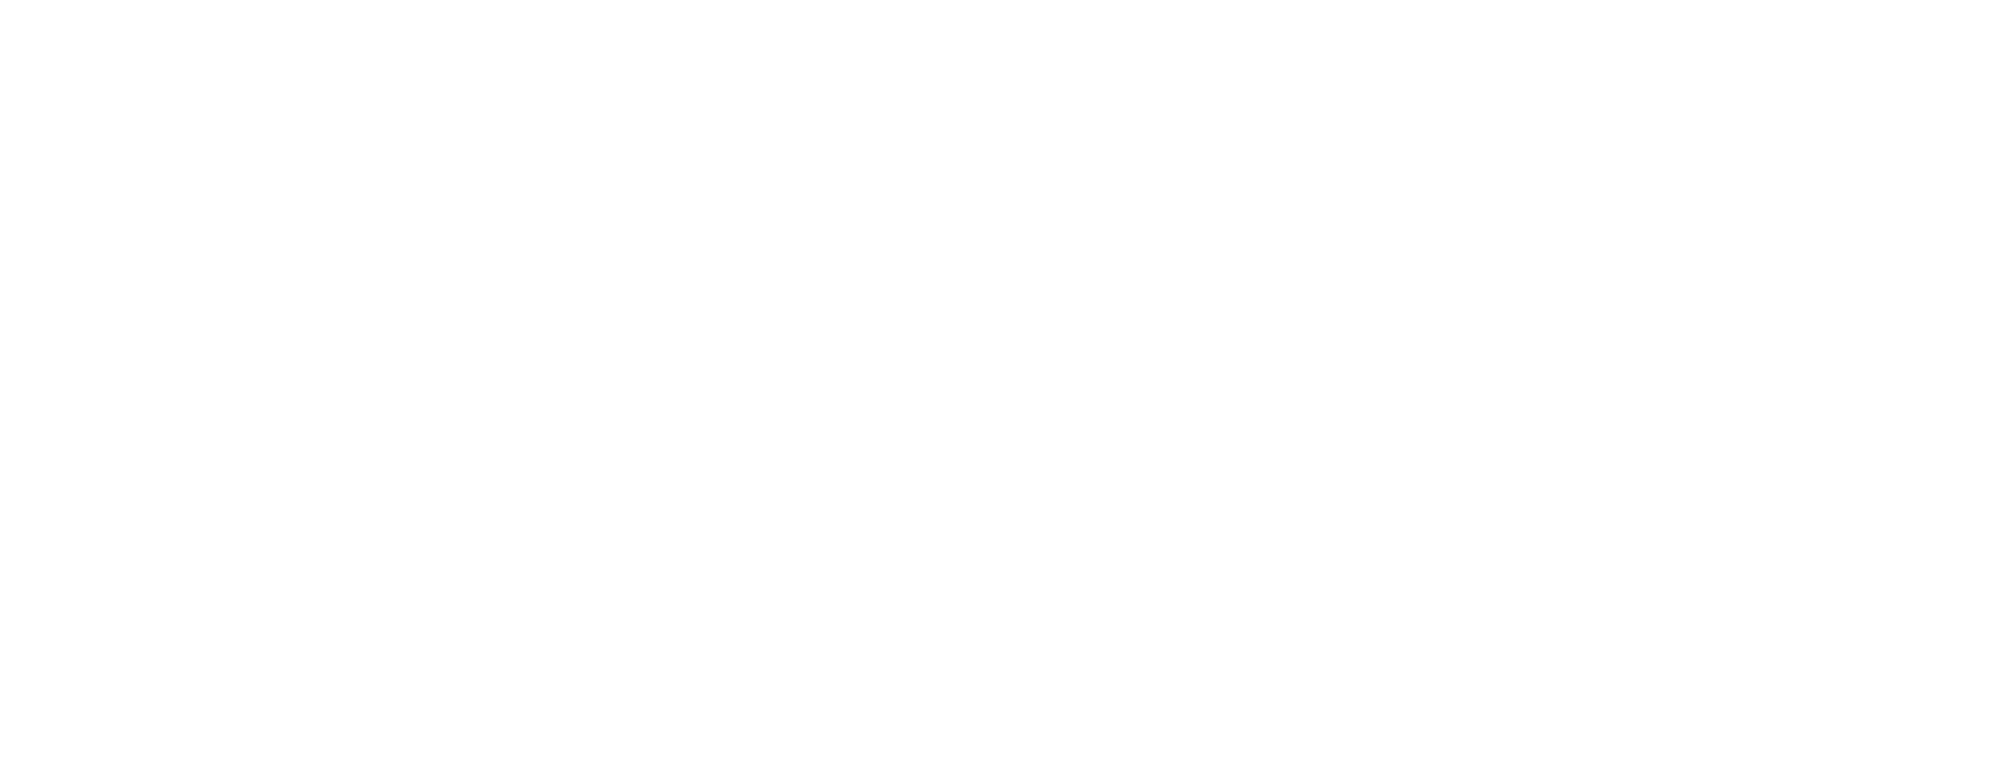 OpenFF Toolkit 0.10.2+0.g5493557d.dirty documentation logo